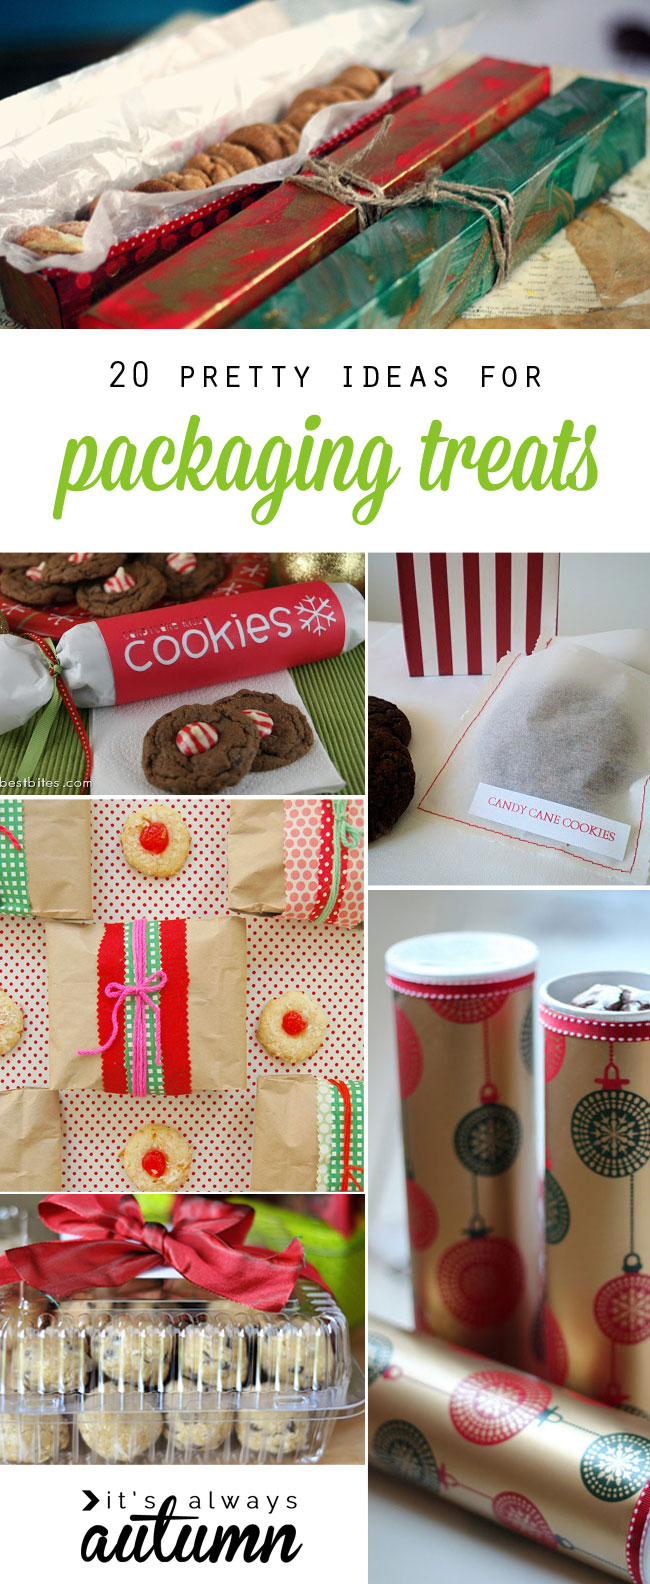 great roundup of DIY treat packaging ideas. Good ideas for packaging up cookies, cupcakes, candy and more for Christmas & holiday gifts.